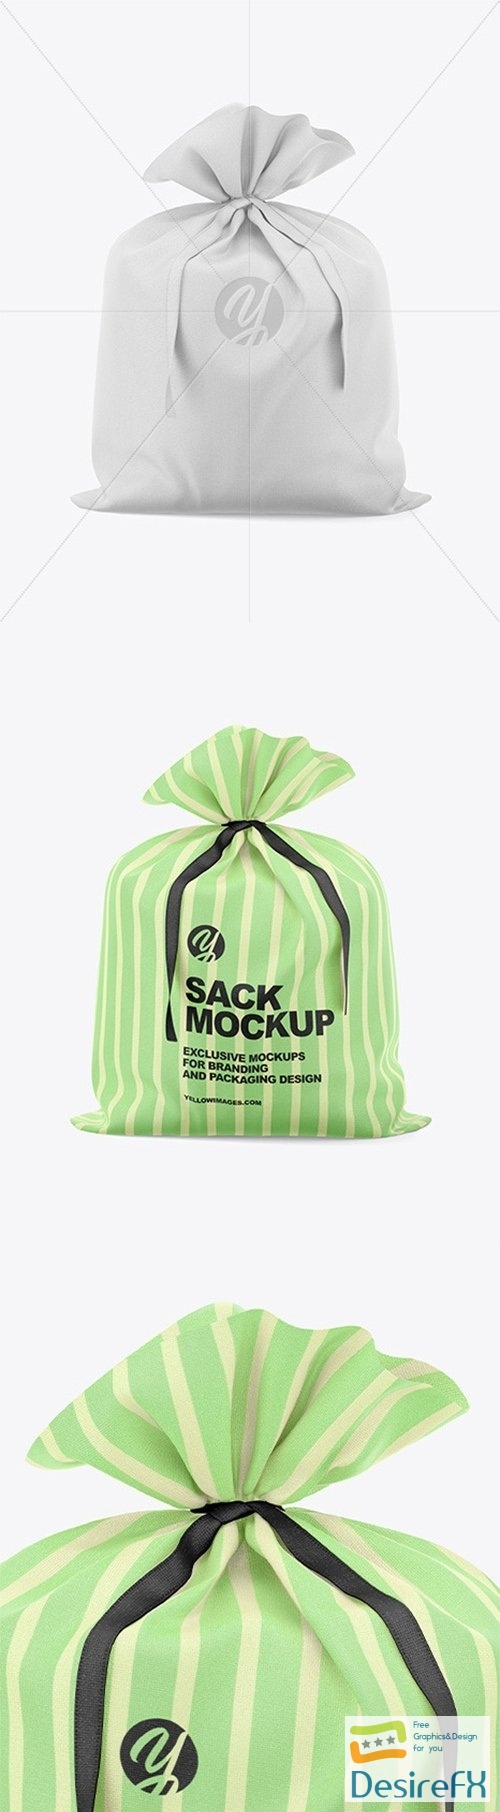 Fabric Sack Mockup - Front View 57808